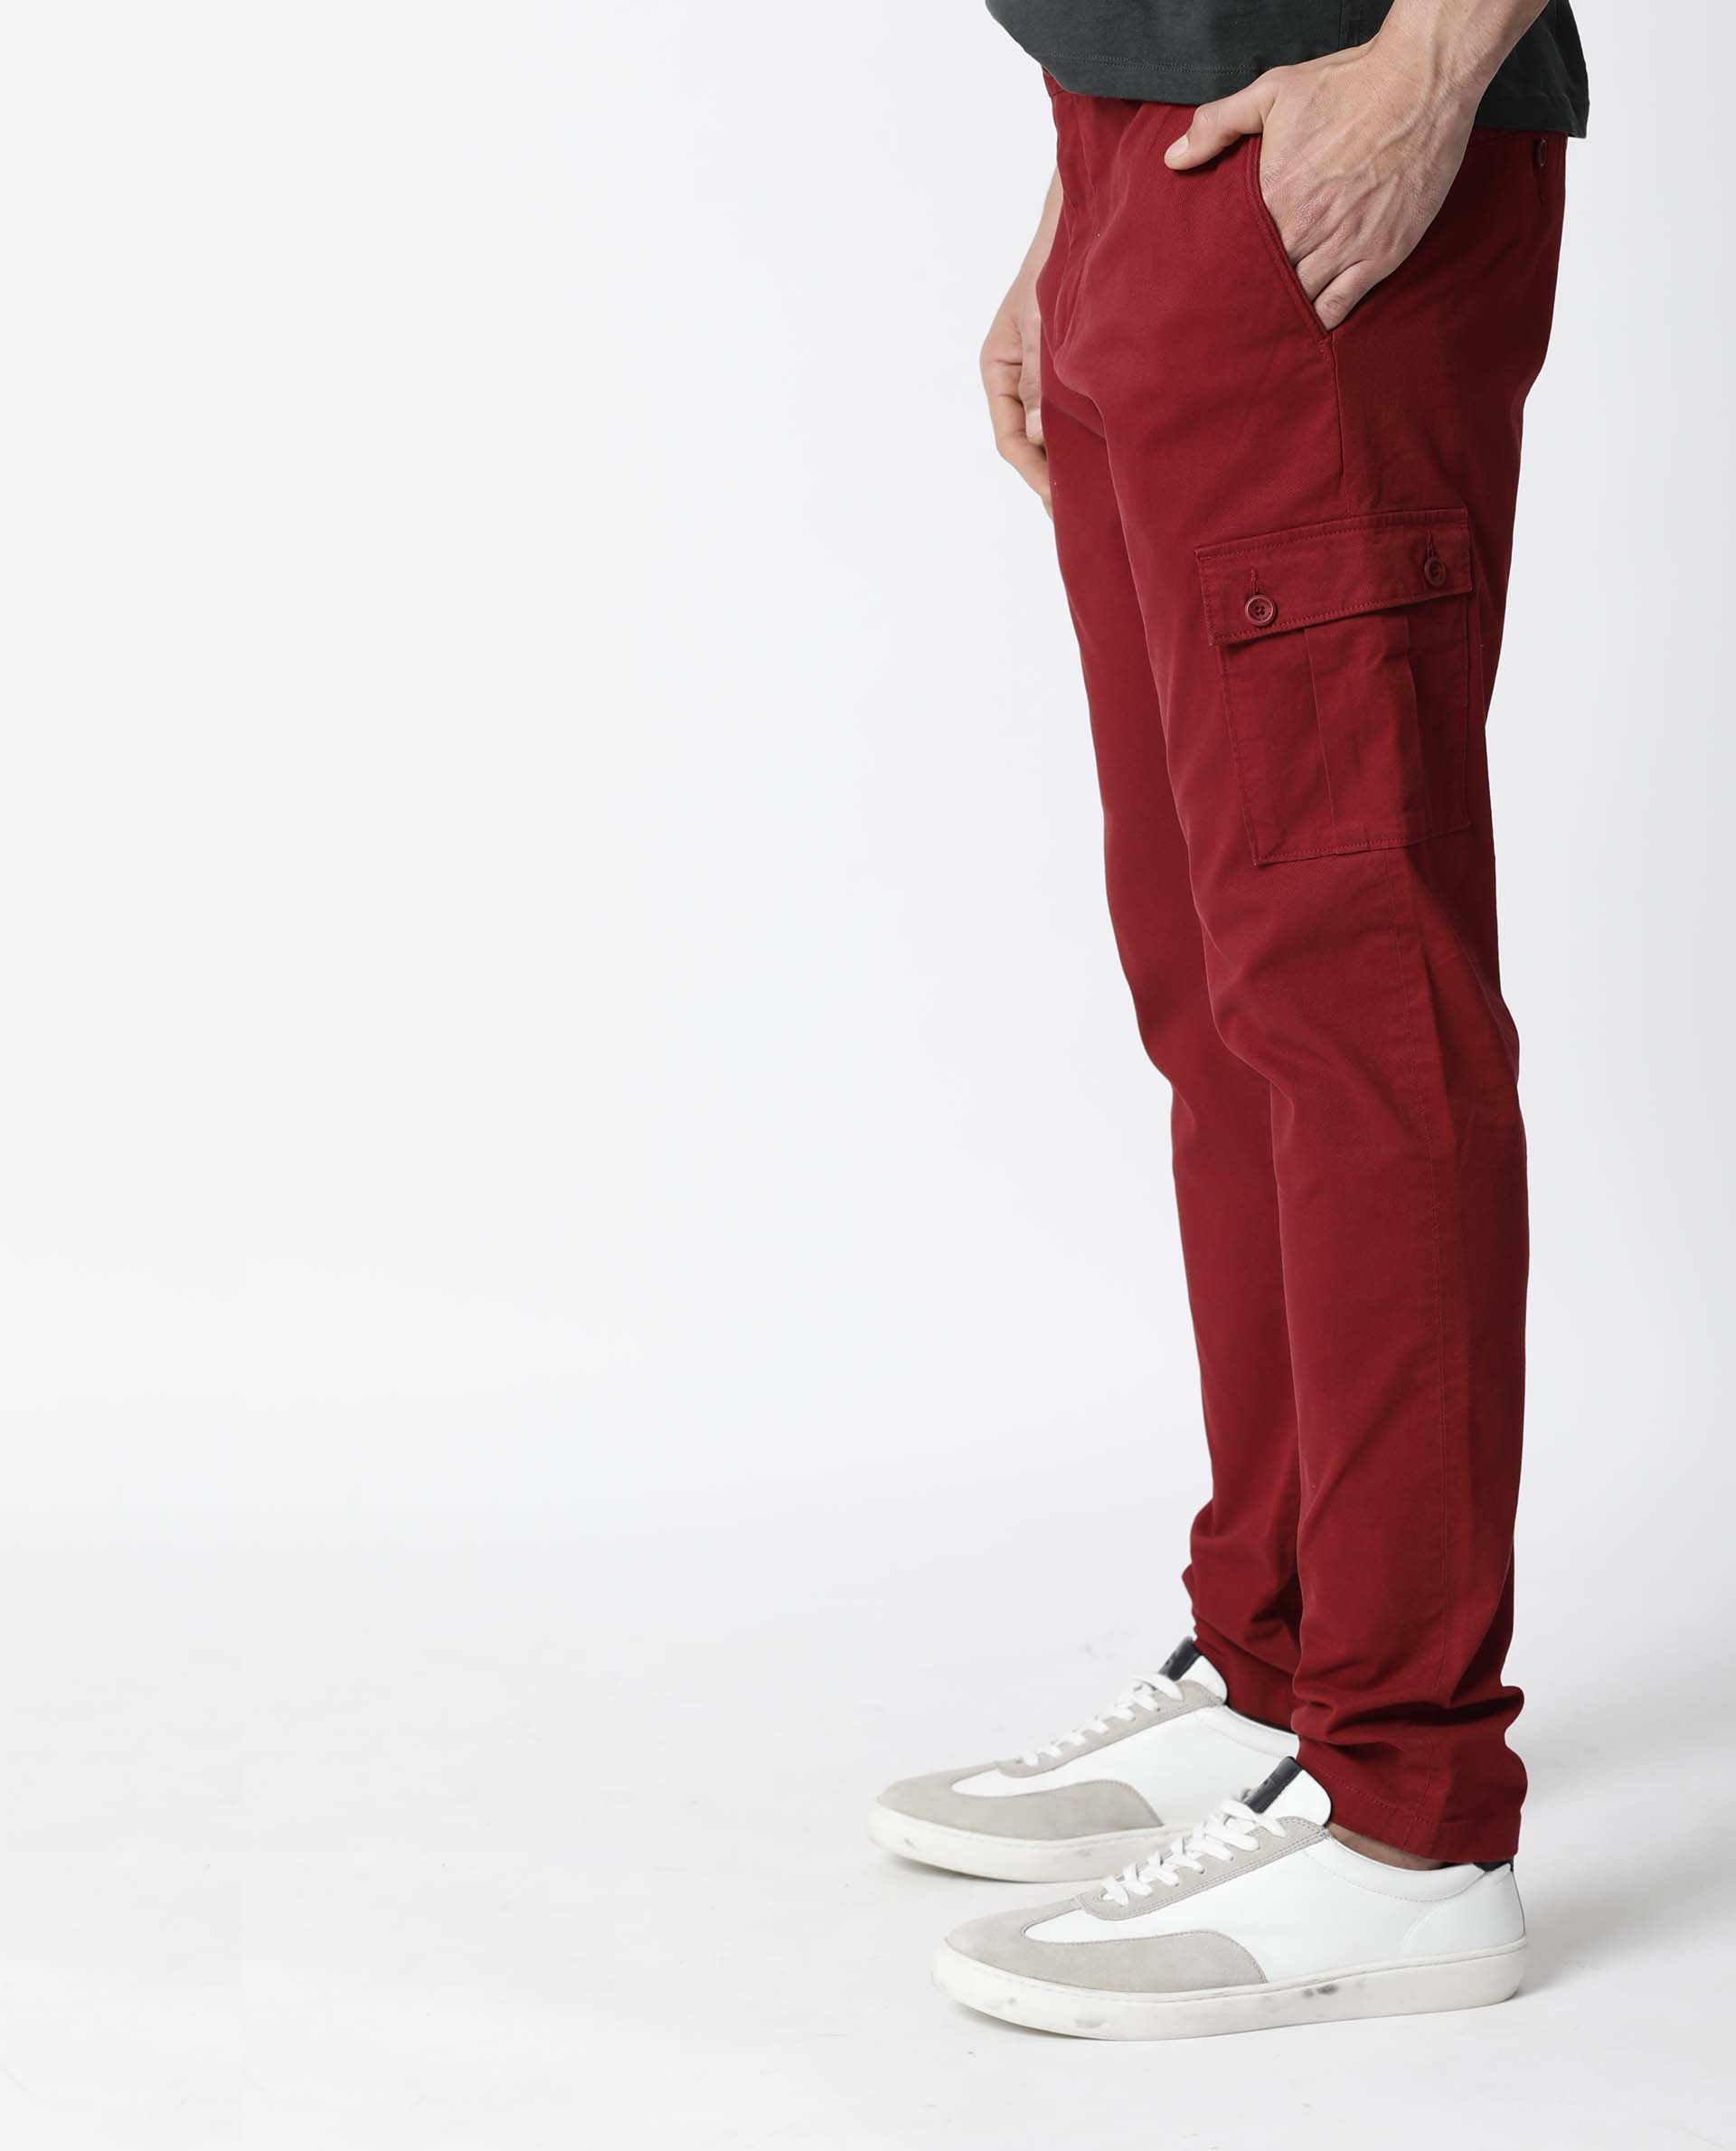 red baggy pants  Red pants outfit Clothes Aesthetic clothes